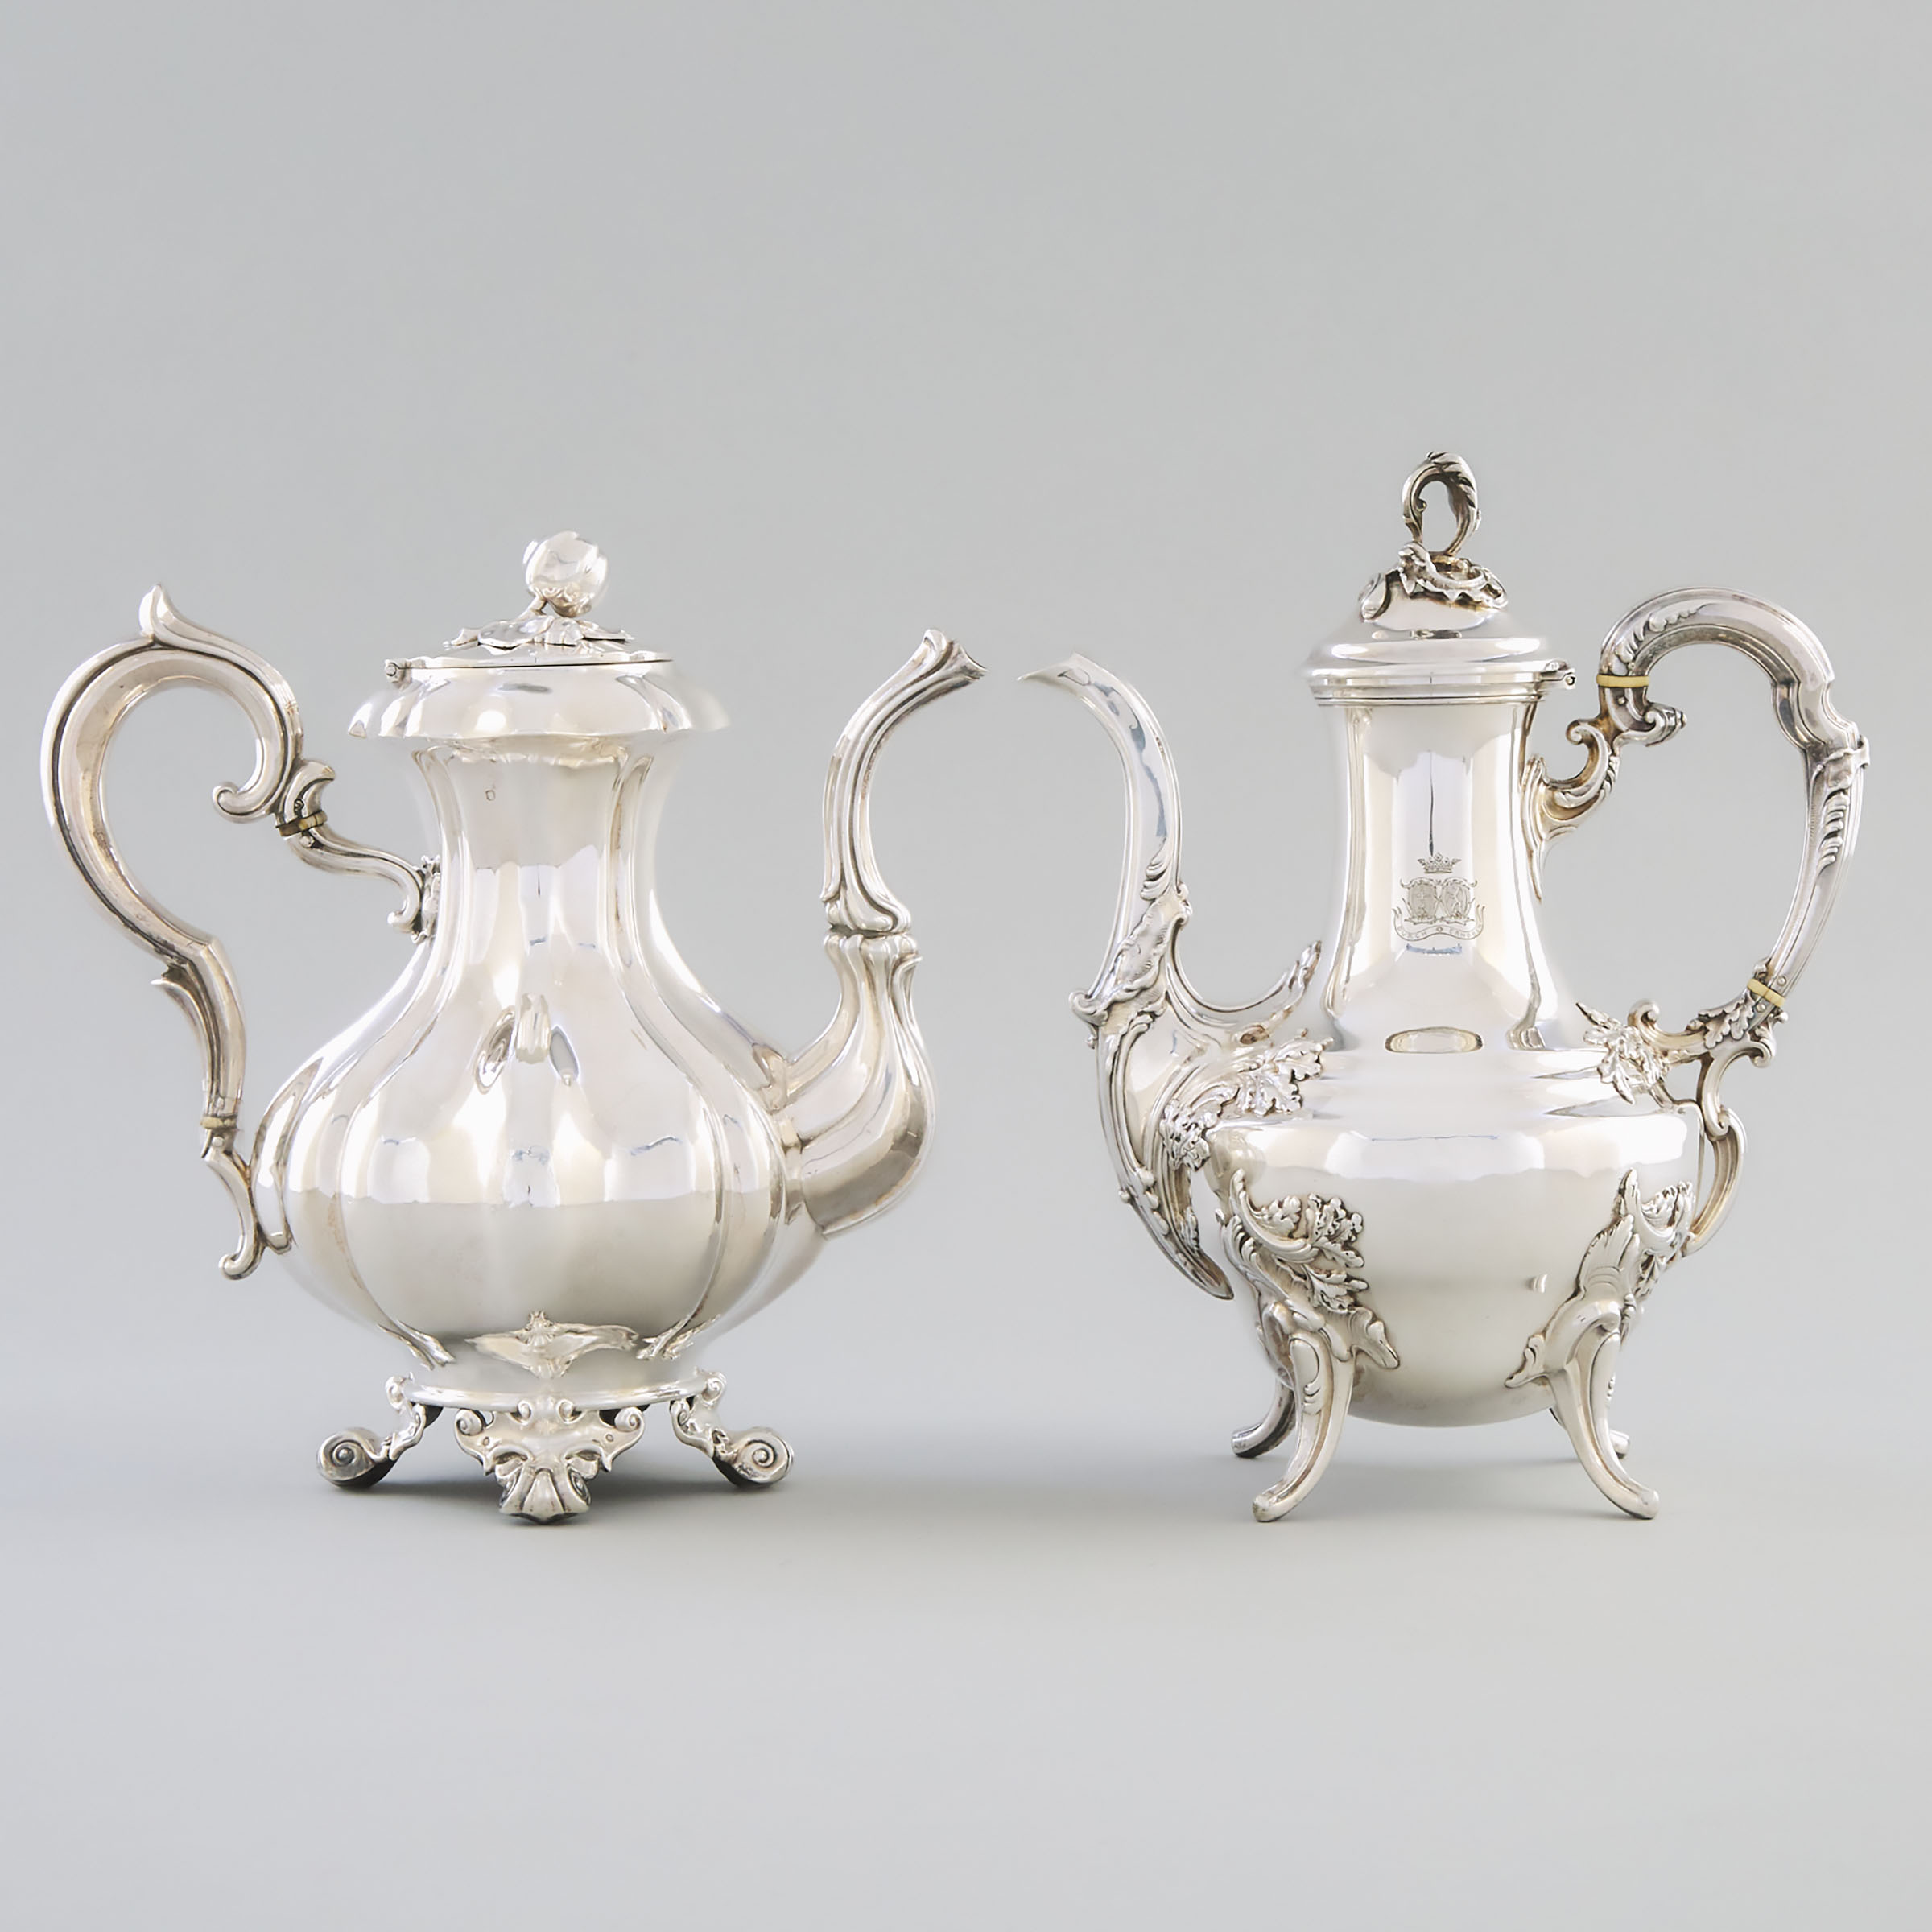 Two French Silver Coffee Pots, 20th century